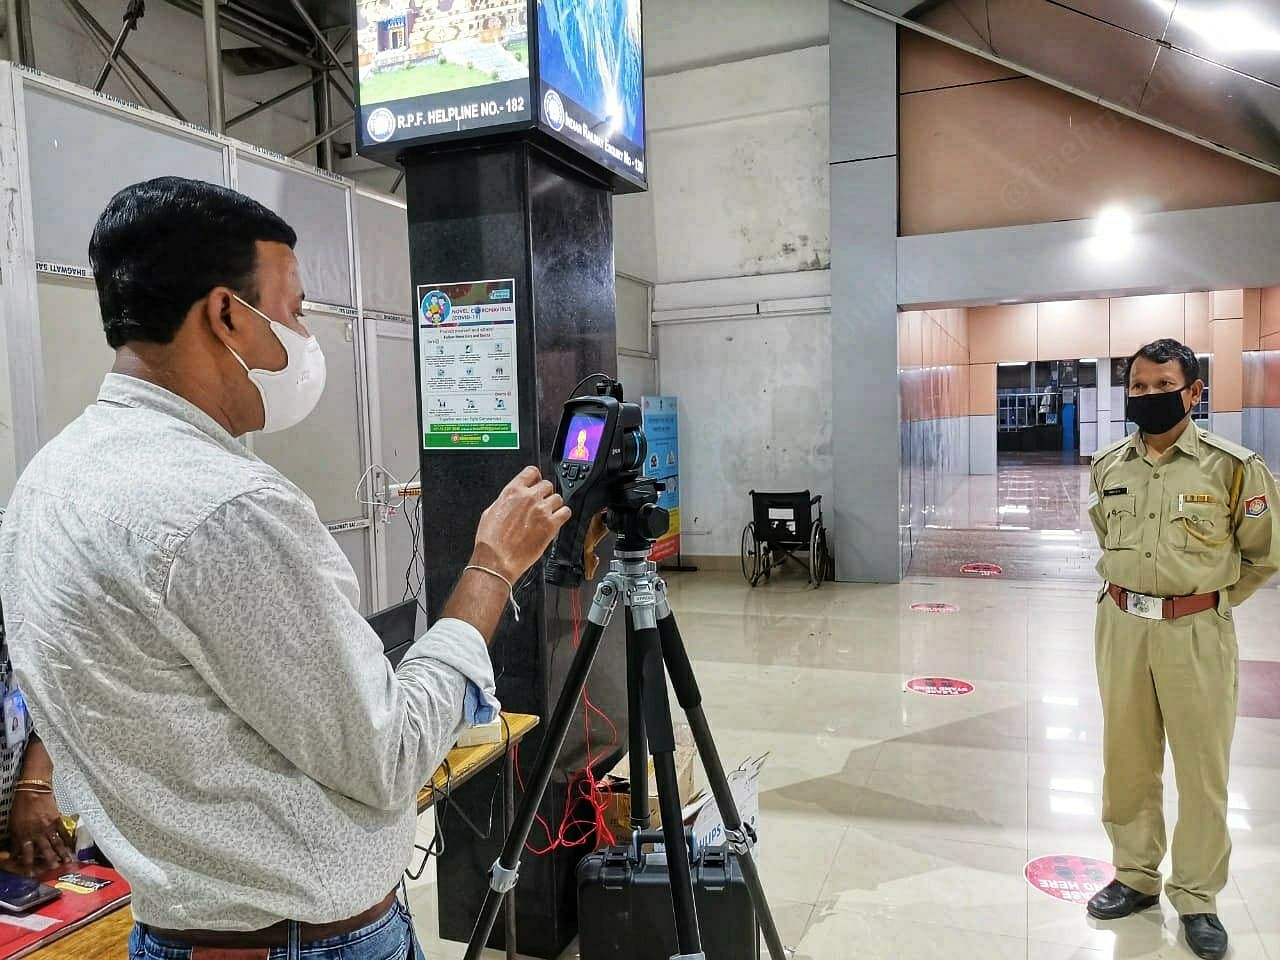 The screening process starts early on, as soon as passengers arrive at the airport and railway stations. A surveillance workers at Guwahati Railway Station checks their temperature and allows them to pass through only if it is below 96 degrees | Photo: Angana Chakrabarti | ThePrint